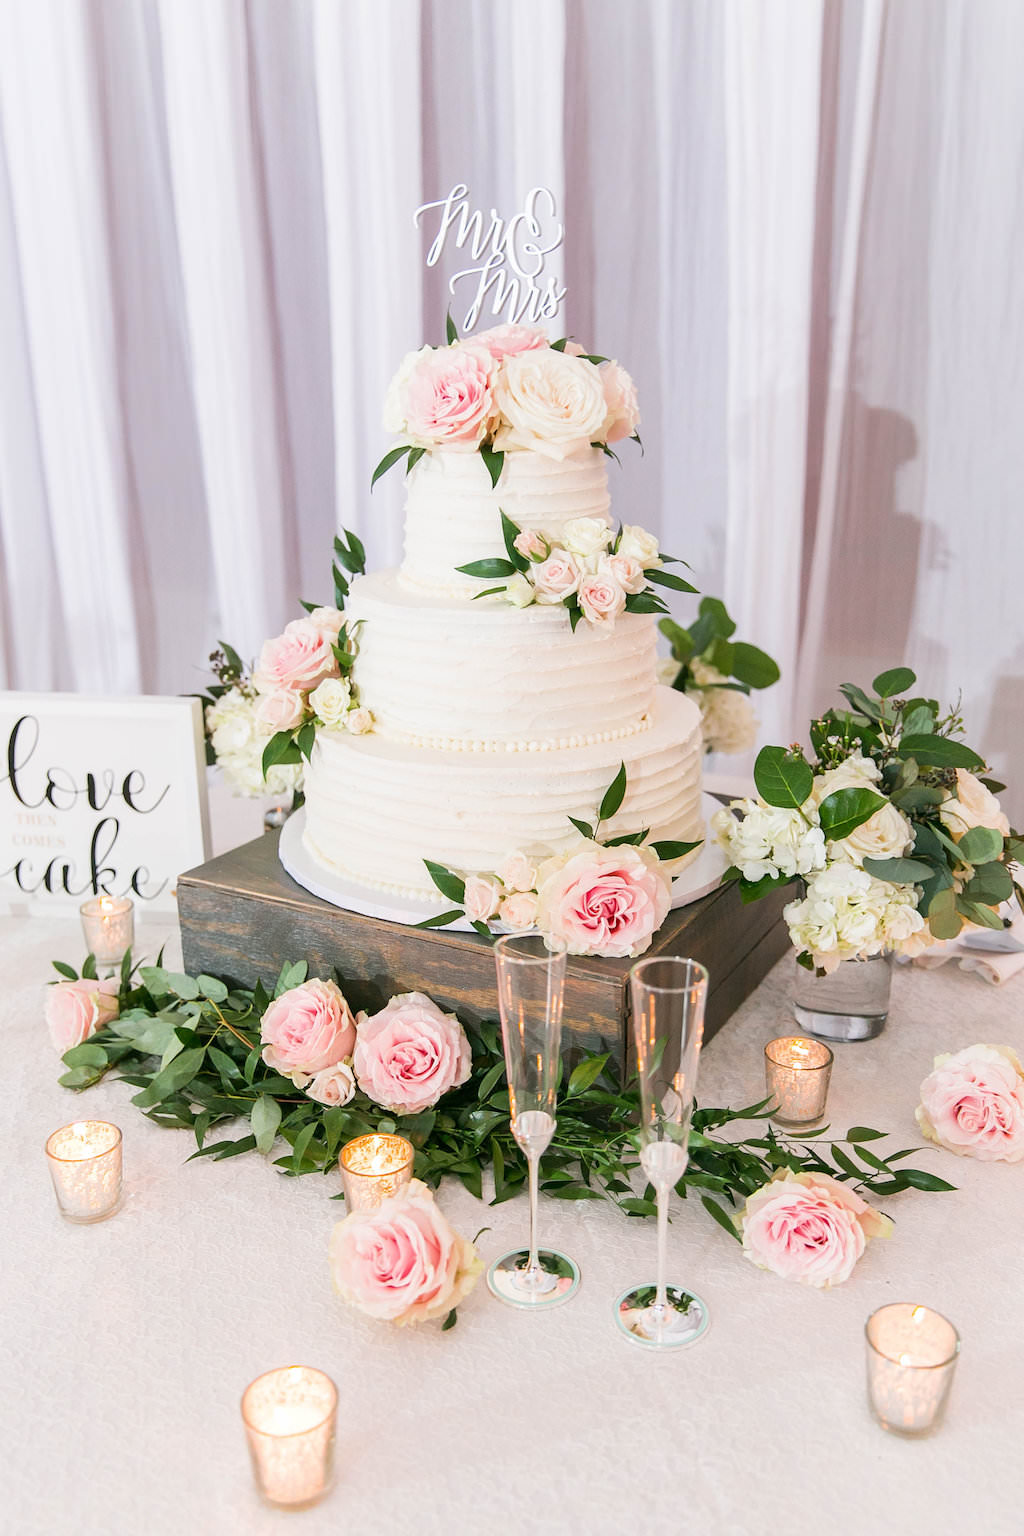 Three Tier Ruffle White Buttercream Cake with Real Blush Pink, Ivory and Greenery Florals on Wooden Cake Stand, Gold Votives and Custom Cake Topper